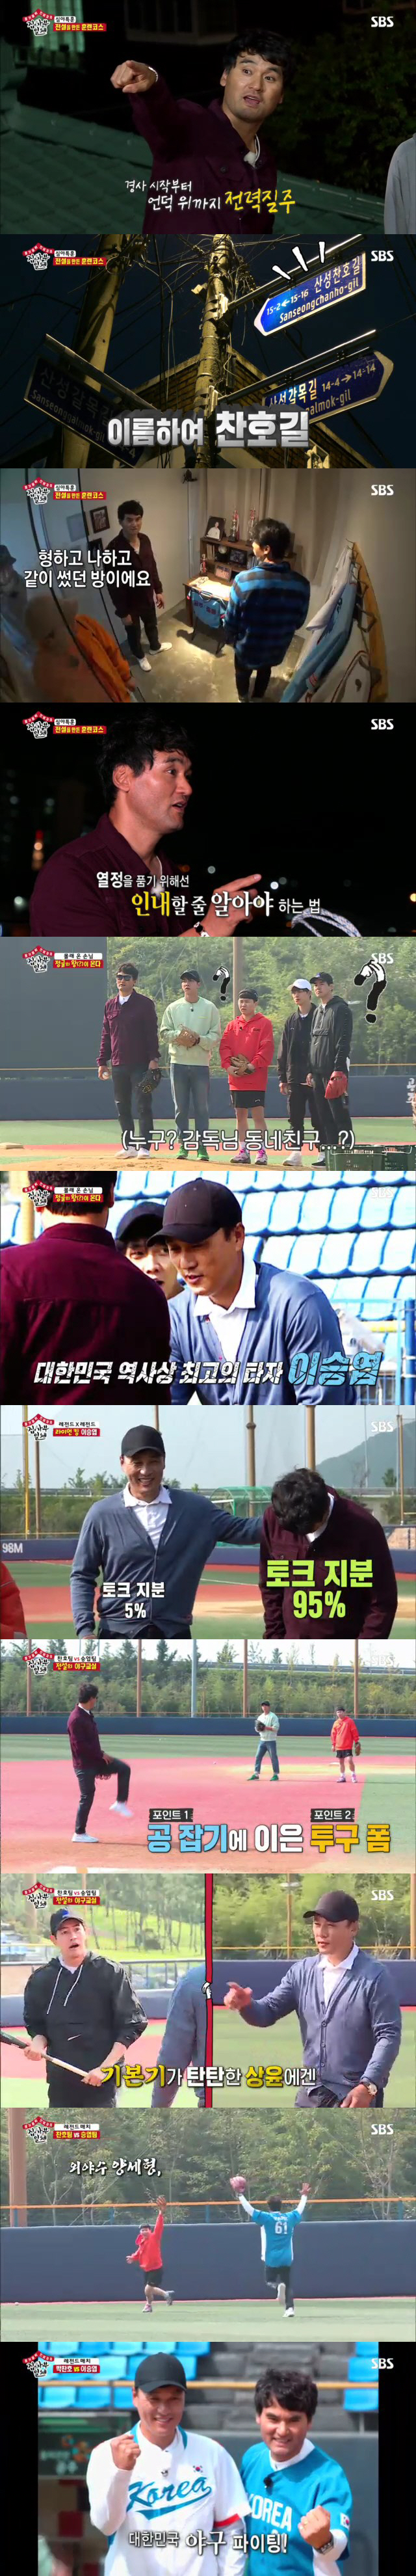 SBS All The Butlers Two Baseball Legends Chan Ho Park and Lee Seung-yeops Battle took the viewers attention and became the best one minute.According to Nielsen Korea, SBS All The Butlers, which was broadcast on the 27th (Sun), continued its upward trend with 8.3% of furniture TV viewer ratings (the second part of the metropolitan area).The 2049 Target TV viewer ratings, which was collected for young viewers aged 20 to 49, was 3.4%, and the highest TV viewer ratings per minute soared to 9.3%.On this day, Lee Seung-gi, Lee Sang-yoon, Yook Sungjae and Yang Se-hyeong led the training tool Kumho Tire to go somewhere.It was a neighborhood where Chan Ho Park lived as a child, and the alley was named Chan Ho Park.Chan Ho Park said, I dragged the Kumho Tire ten times every night, I never walked up to my house, I was not happy to walk.His past remained at the house of Chan Ho Park, which is now a memorial.In a diary written by Chan Ho Park in 1991, I am tired of repeated Exercise every day, but I think it is the right way to overcome it.I will do whatever difficulties I have for my goal and future.I have a strong belief to do, he said, suggesting the troubles of young Chan Ho Park and the efforts to overcome it.Chan Ho Park later cited patience as creating a special player.Patience is the only thing that makes me passionate, he said. Patience and effort are the fruits of one more than I did.The following day, Chan Ho Park and its members headed to Princess City Chan Ho Park Baseball, named after Chan Ho Park.Lee Seung-yeop, a national hitter, appeared as a surprise guest in front of the members who wanted to start Baseball there.Lee Seung-yeop, who has been on the air for a long time, said, I was not able to refuse as a junior because I had a lot of help from Chan Ho.Lee Seung-yeop, on the other hand, expressed Chan Ho Park as a senior who takes off unconditionally when his juniors are in trouble.I retired and paid more attention to my future than my family, and I am so grateful, he said to Chan Ho Park.The members decided to share the team and play the Baseball match.Lee Seung-gi and Yang Se-hyeong were trained in pitching and batting, respectively, with Chan Ho Park team, Lee Sang-yoon and Yook Sungjae as Lee Sang-yeop team.Then the full-scale match began: Kyonggi was played in a three-round, one-on-one battle.Lee Seung-yeop and Lee Sang-yoon showed off a swing, but Yang Se-hyeong caught the ball with a diving catch and the victory went to Chan Ho Park team.Lee Seung-gi then suggested Chan Ho Park and Lee Seung-yeops Battle, saying, Do you intend to wash away the humiliation of the team with Kyonggi?Two baseball legends Battle came to an end: Lee Seung-yeop swung in the manned ball at Chan Ho Park, and the second was a fast ball with tremendous speed.Lee Seung-yeop showed a perfect blow, but the ball fell behind the Kyonggi field, so if you hit a strike, Chan Ho Park would win.Chan Ho Park threw the fourth ball, and with the tensions hovering, Lee hit the fence and led to a cheering of everyone.The two legends, who had enthusiastically fanned Baseball fans, also took the best one minute with TV viewer ratings rising to 9.3% on the day.Finally, Lee Seung-yeop said, It was good to wear a uniform with a friend for a long time. Sports can spread good energy to many people.I would like you to watch all the sports as well as Baseball with interest. Chan Ho Park also said, Korea Baseball Fighting.